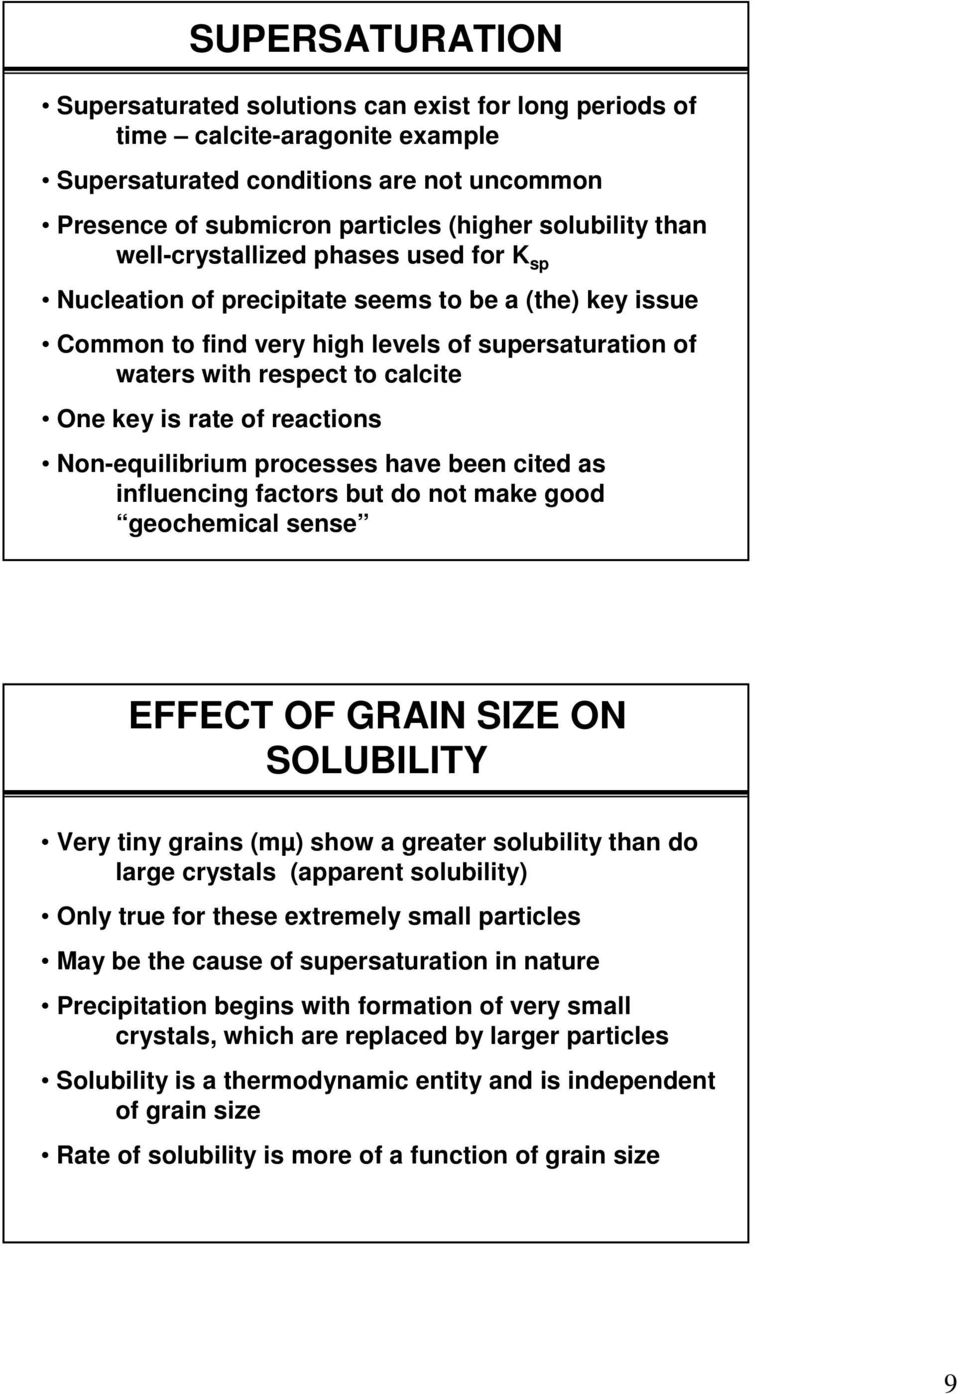 reactions Nonequilibrium processes have been cited as influencing factors but do not make good geochemical sense EFFECT OF GRAIN SIZE ON SOLUBILITY Very tiny grains (mµ) show a greater solubility